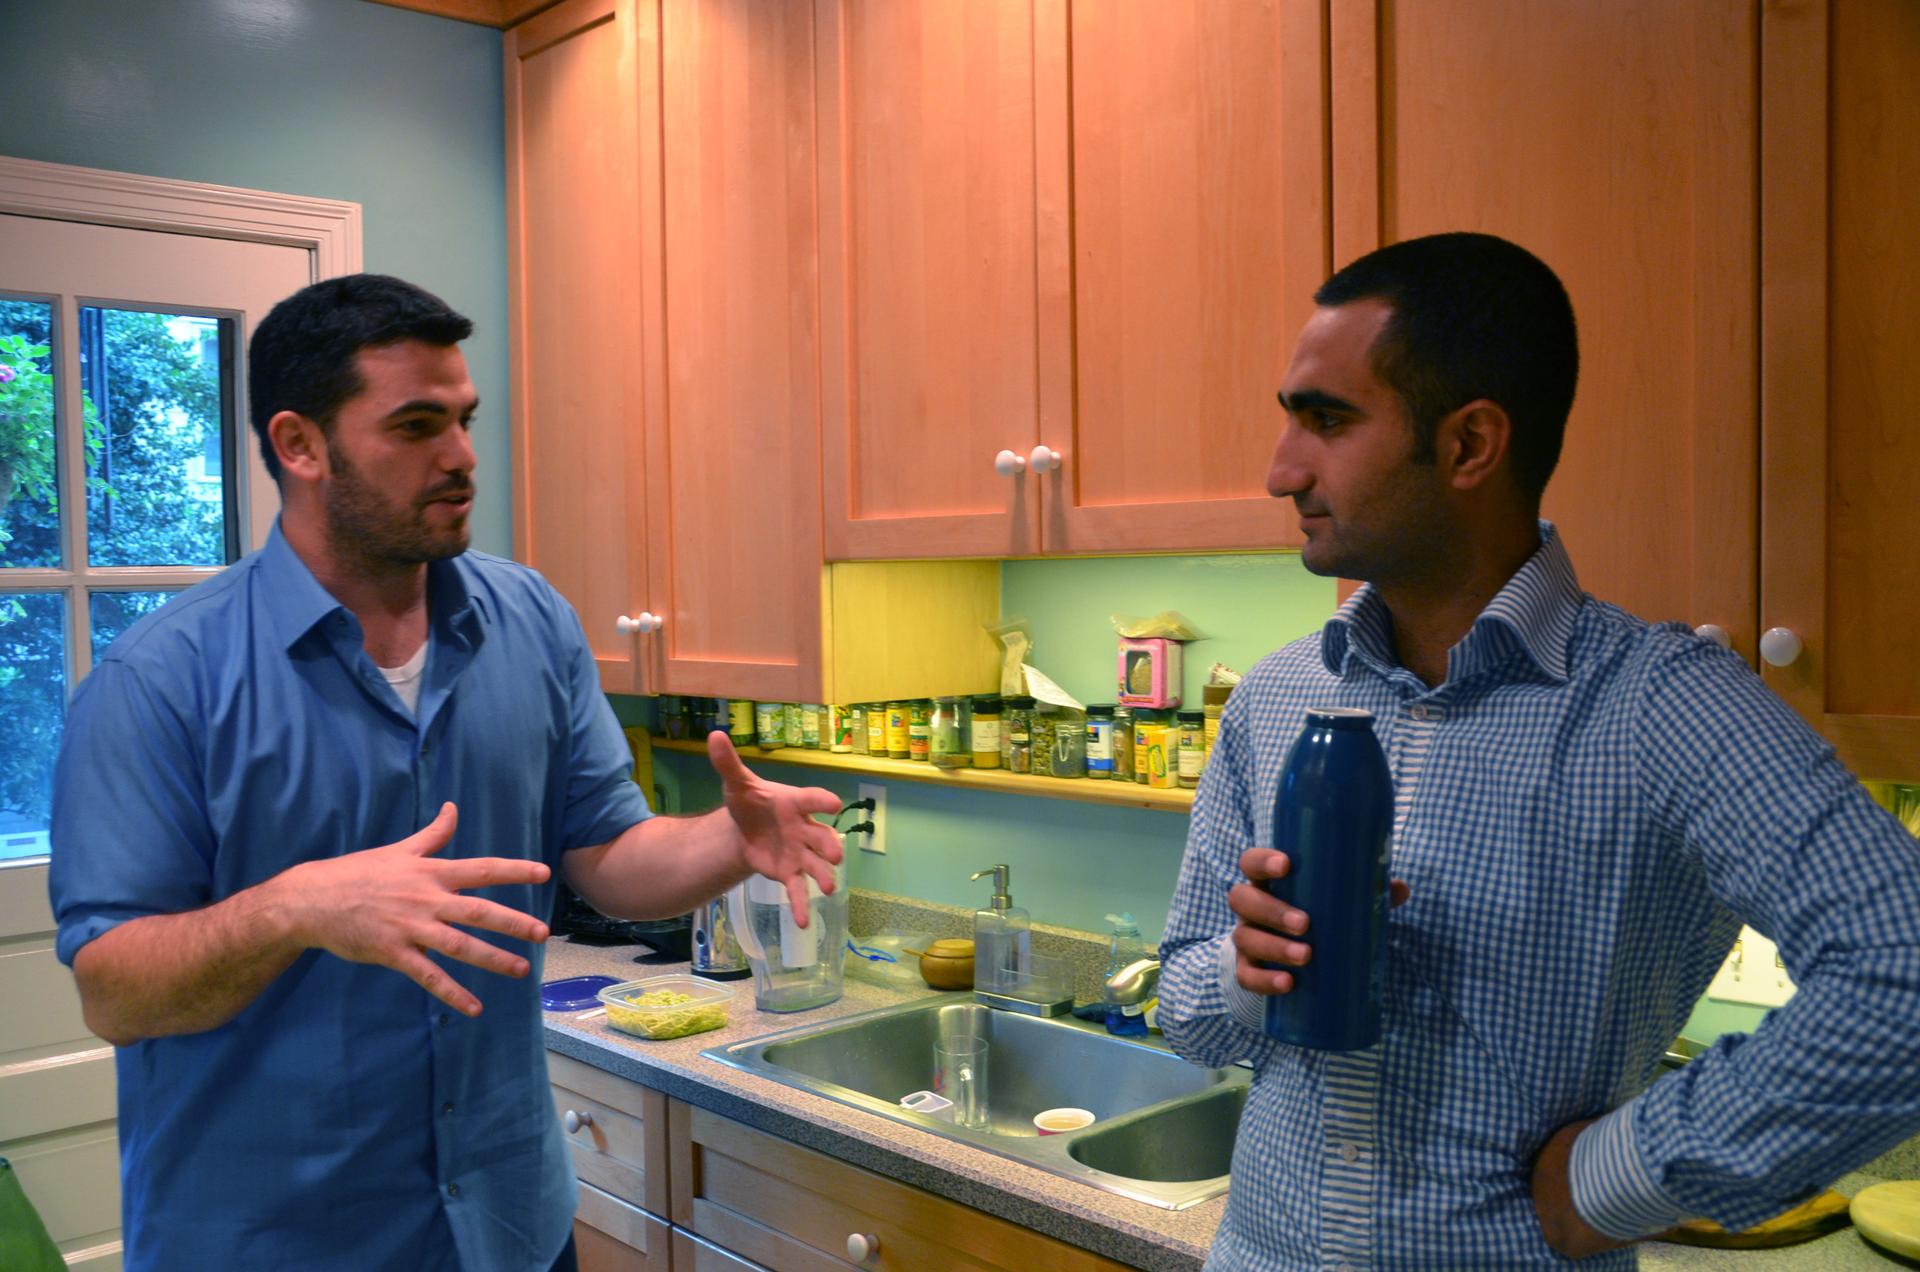 Yehonatan Toker (left) and Hamze Awawde (right) in their kitchen in Washington, DC. Toker, an Israeli, and Awawde, a Palestinian, are in Washington for internships, and they're sharing a house. 